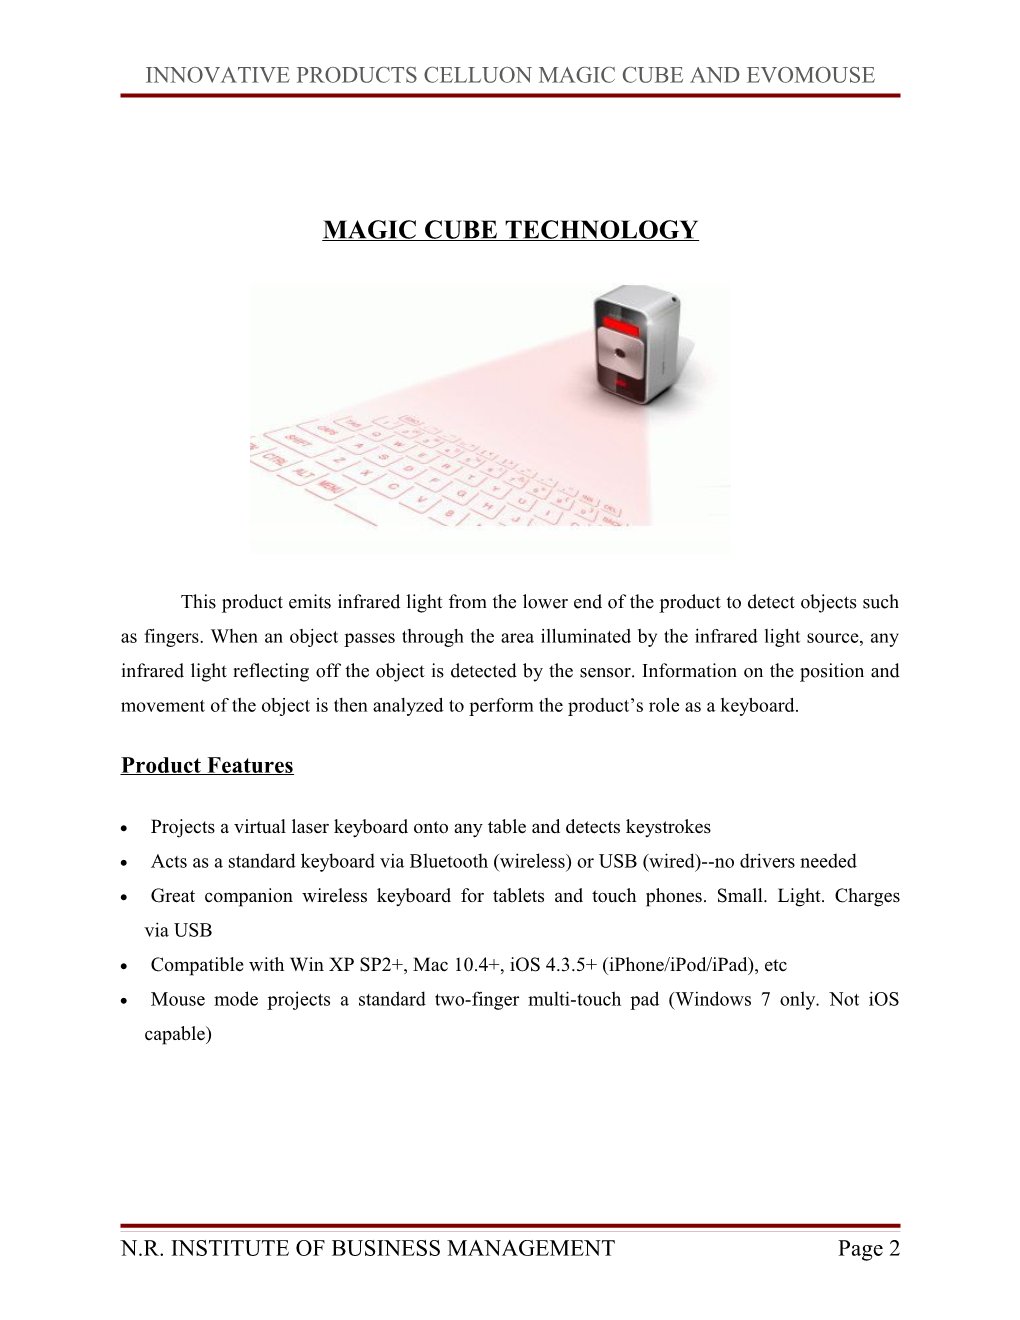 Innovative Products Celluon Magic Cube and Evomouse